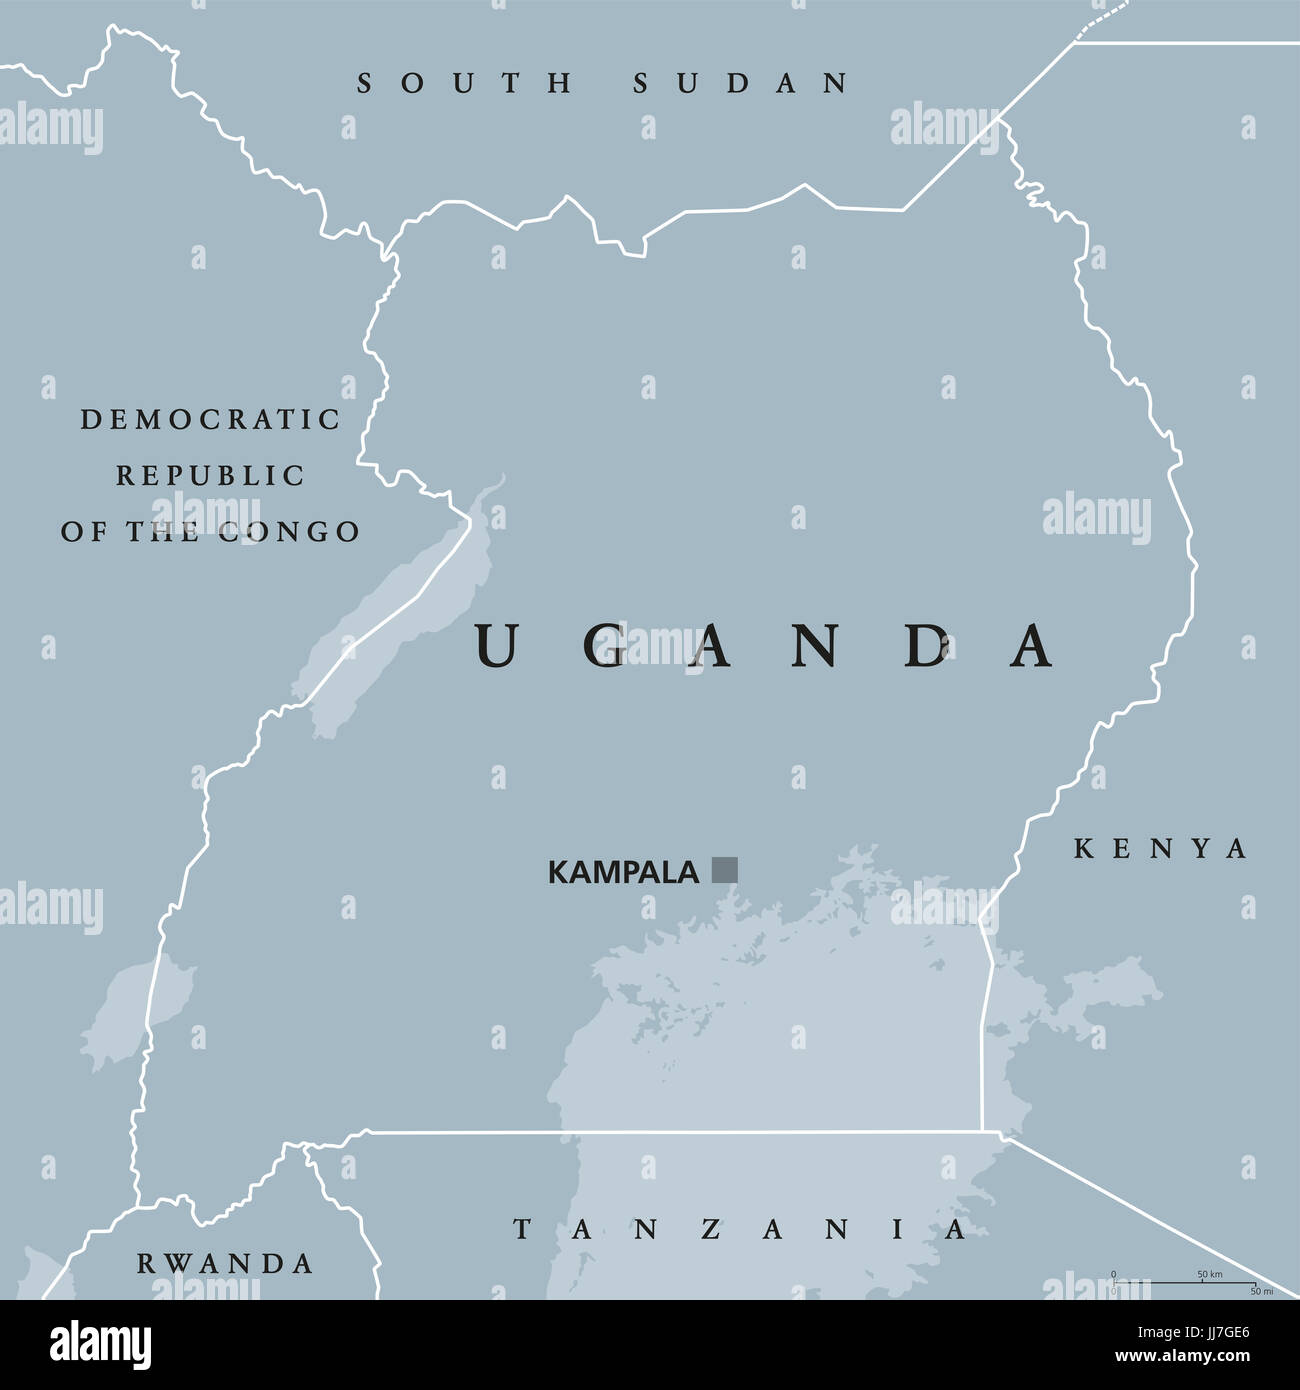 Uganda political map with capital Kampala. Republic in East Africa. Landlocked country in the African Great Lakes region. Stock Photo